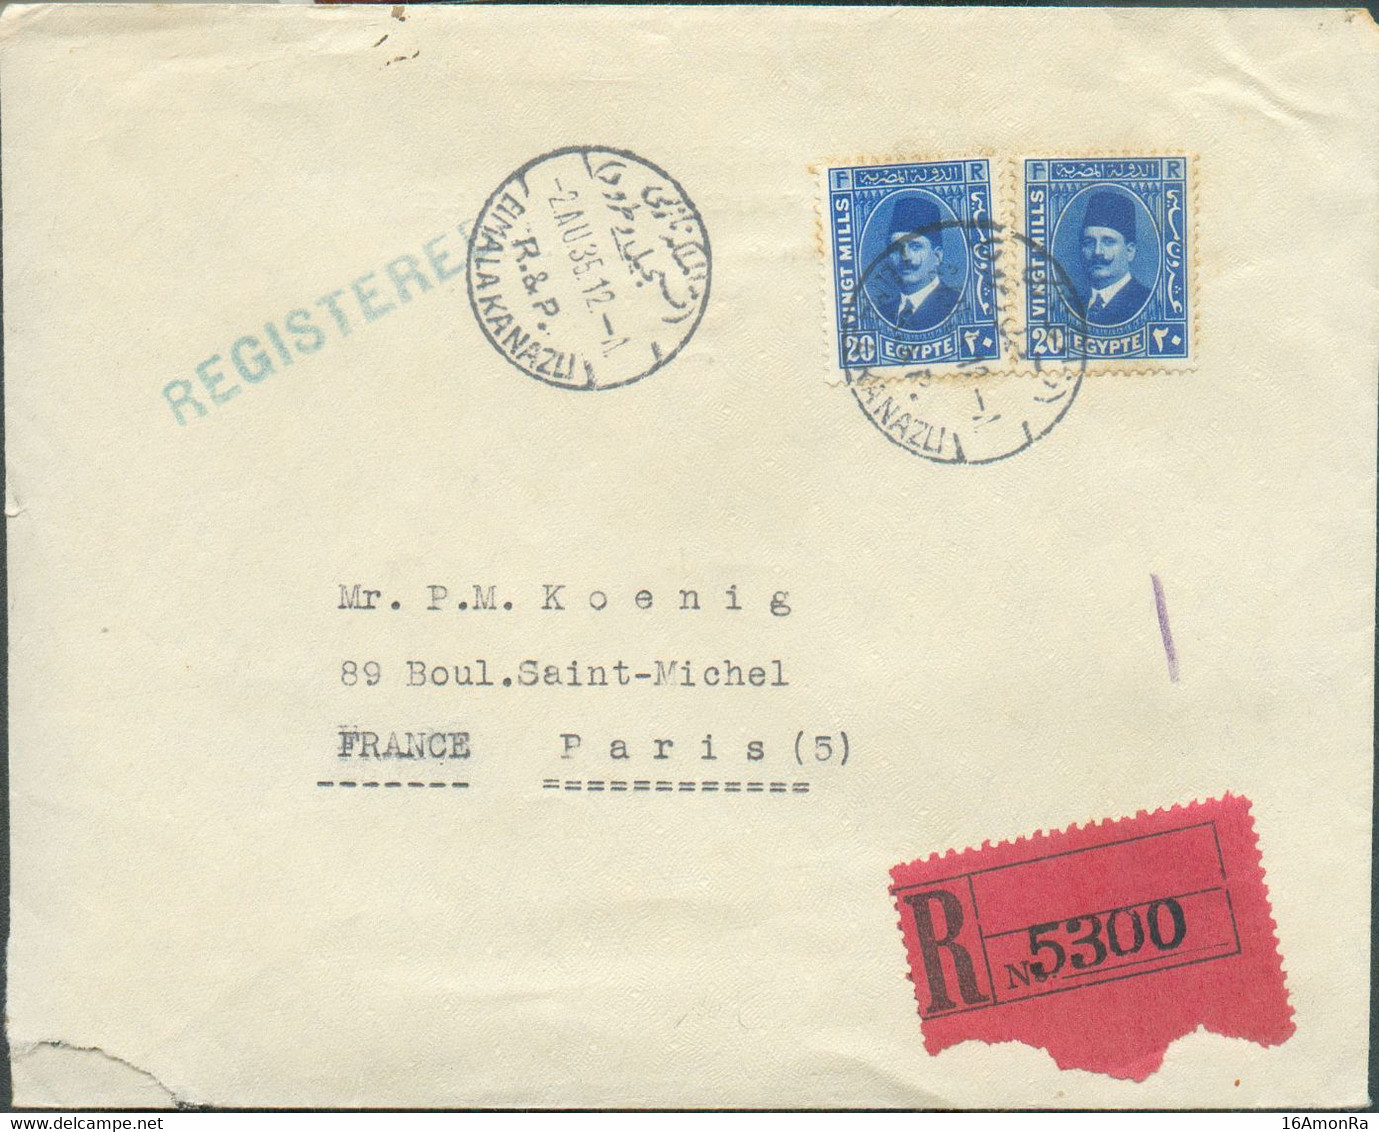 KING FOUAD 20p X2 Cancelled EL MALAKA NAZU (CAIRO) On Registered (label) Cover  2. AUG. 1935 To Paris - 19474 - Covers & Documents